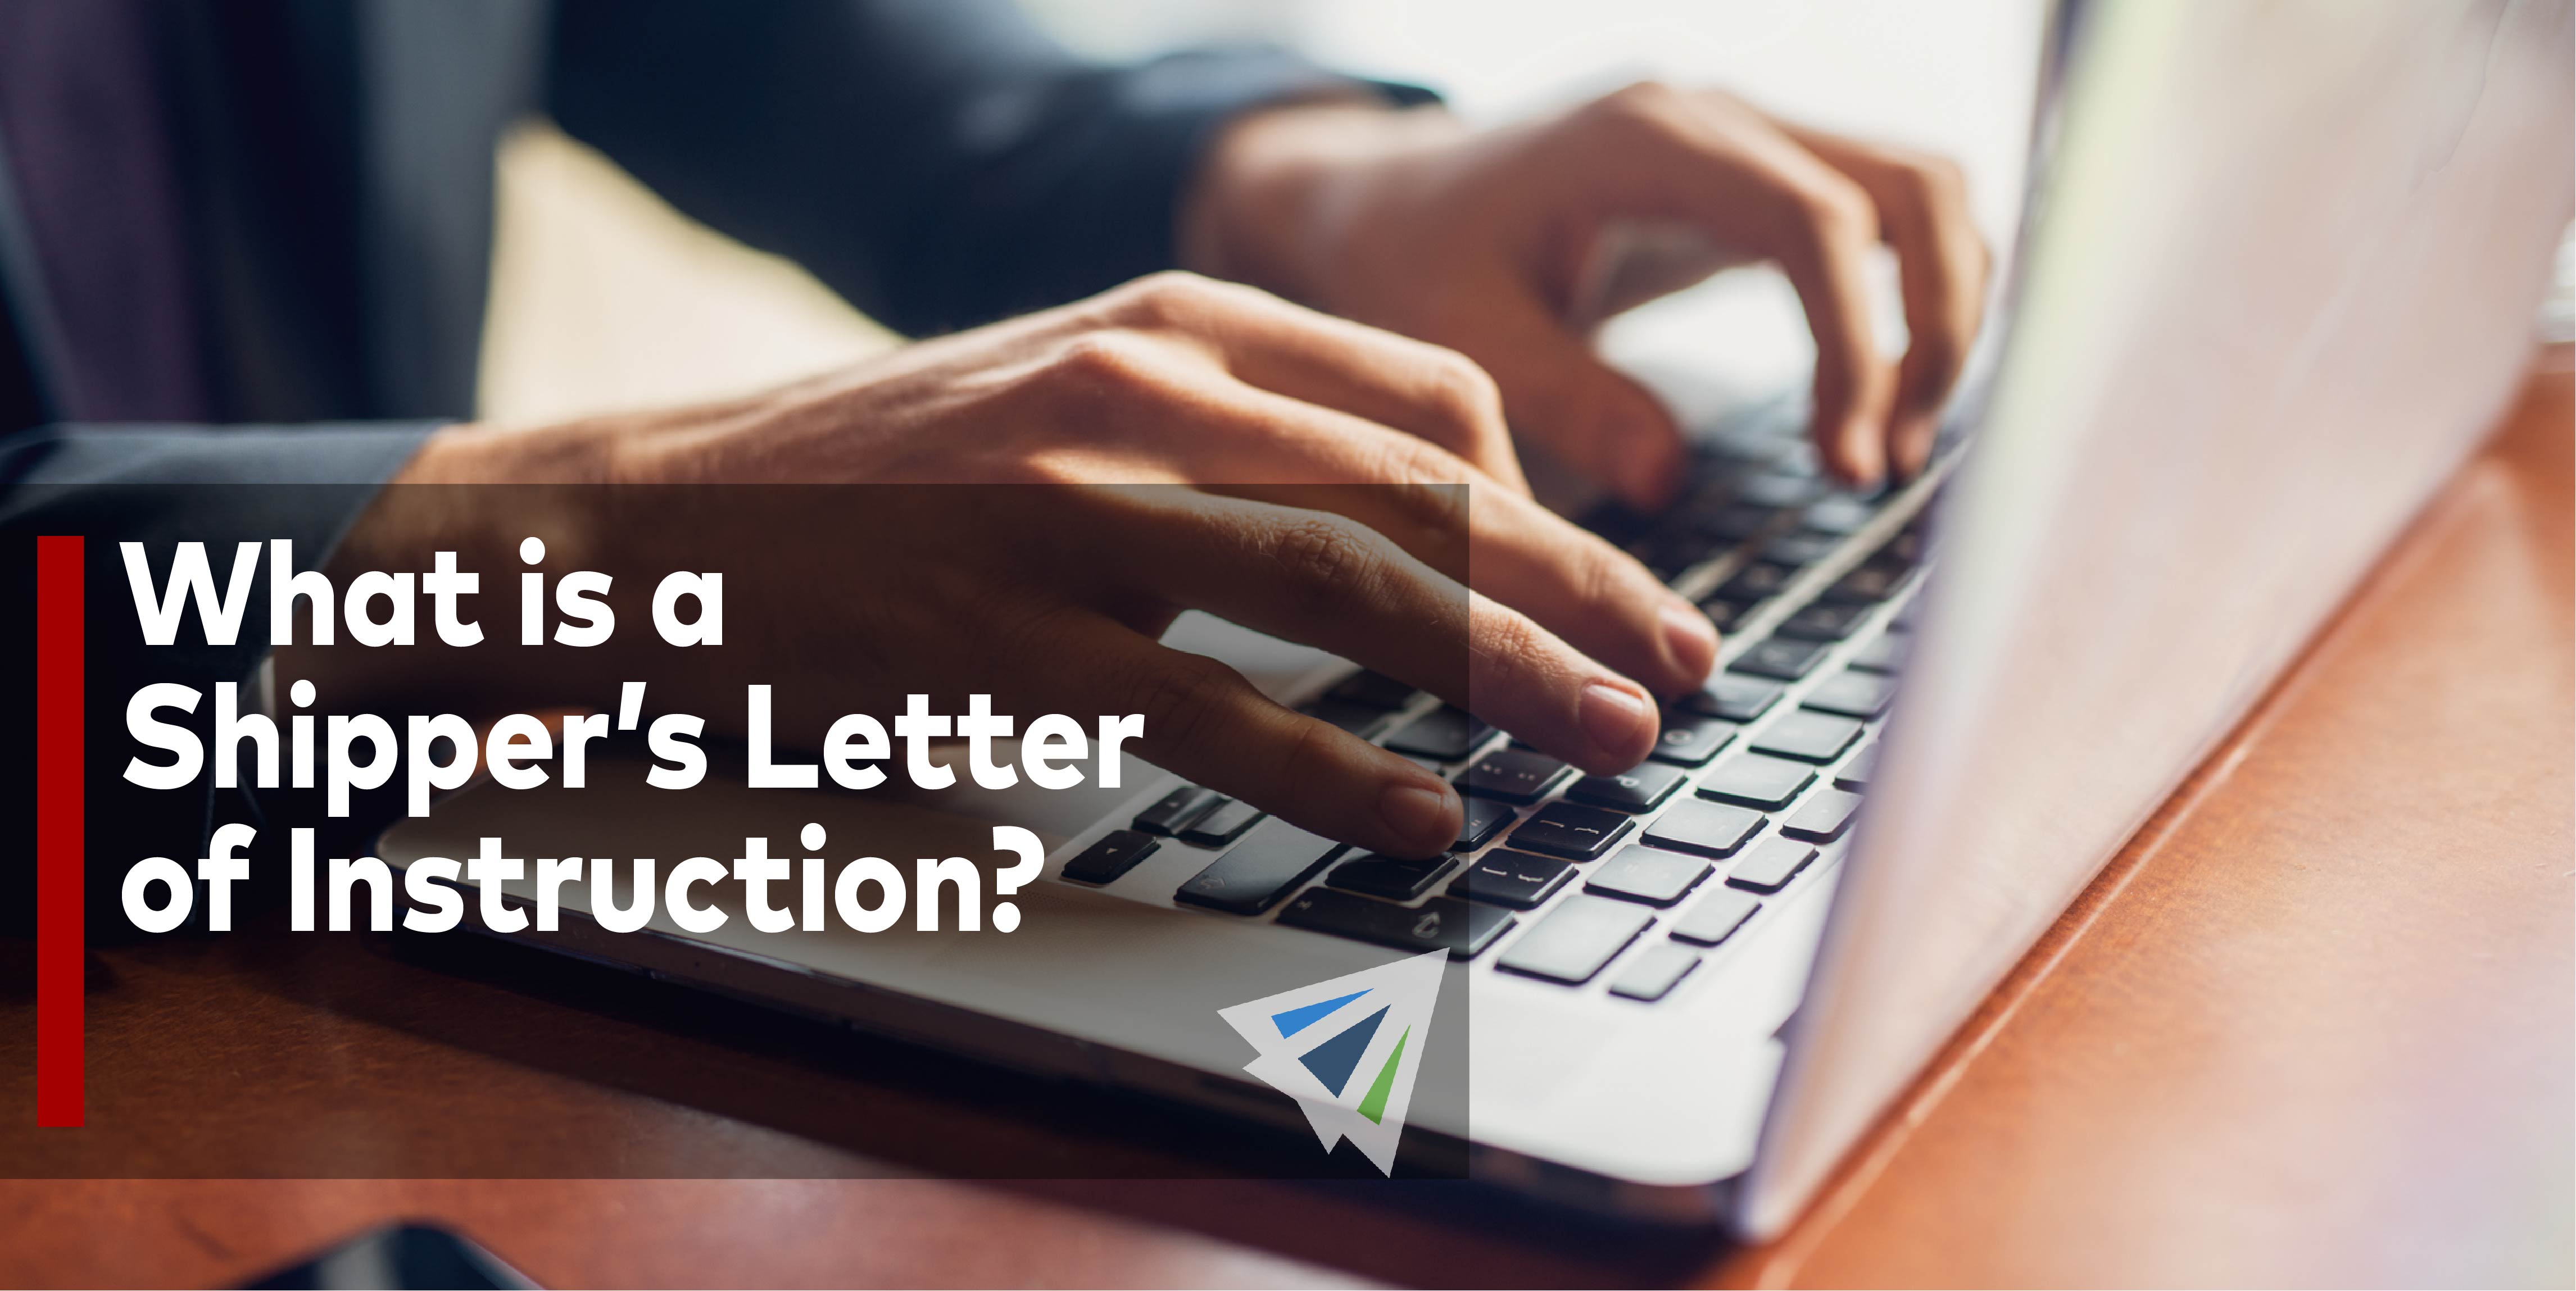 What is a Shipper’s Letter of Instruction?